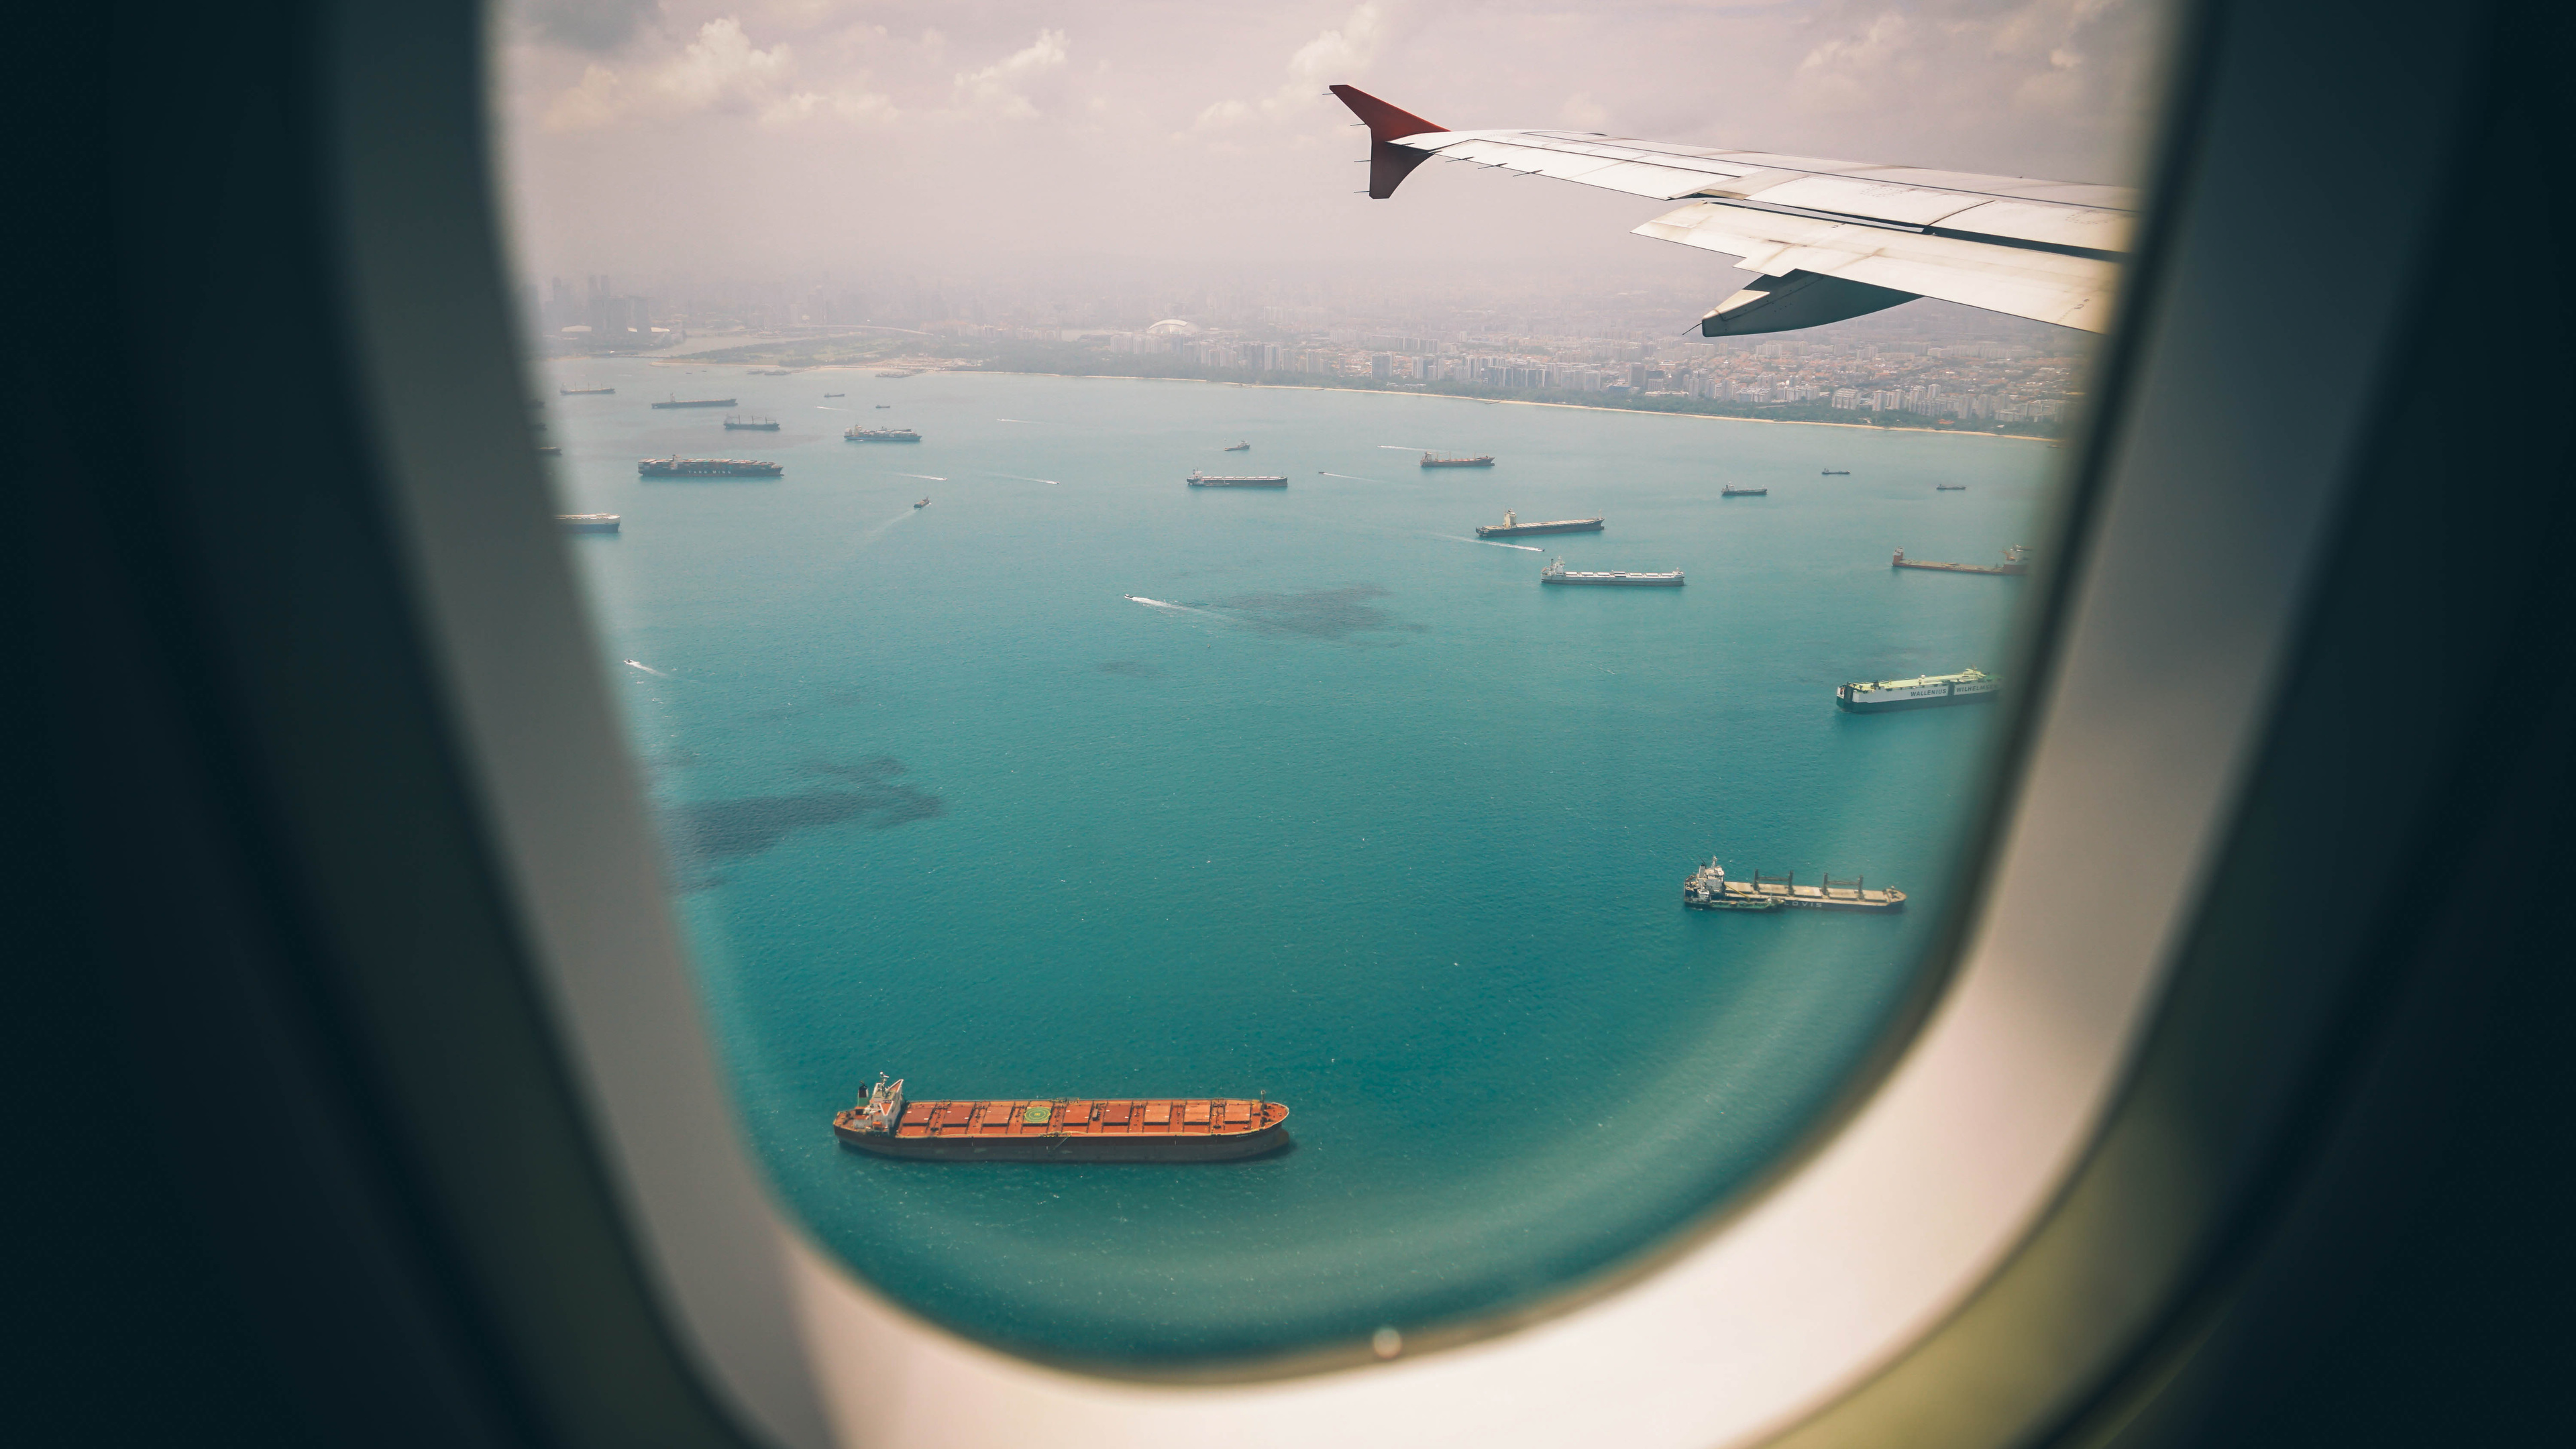 Boats Sea View From Airplane Window 4k - HD Wallpaper 